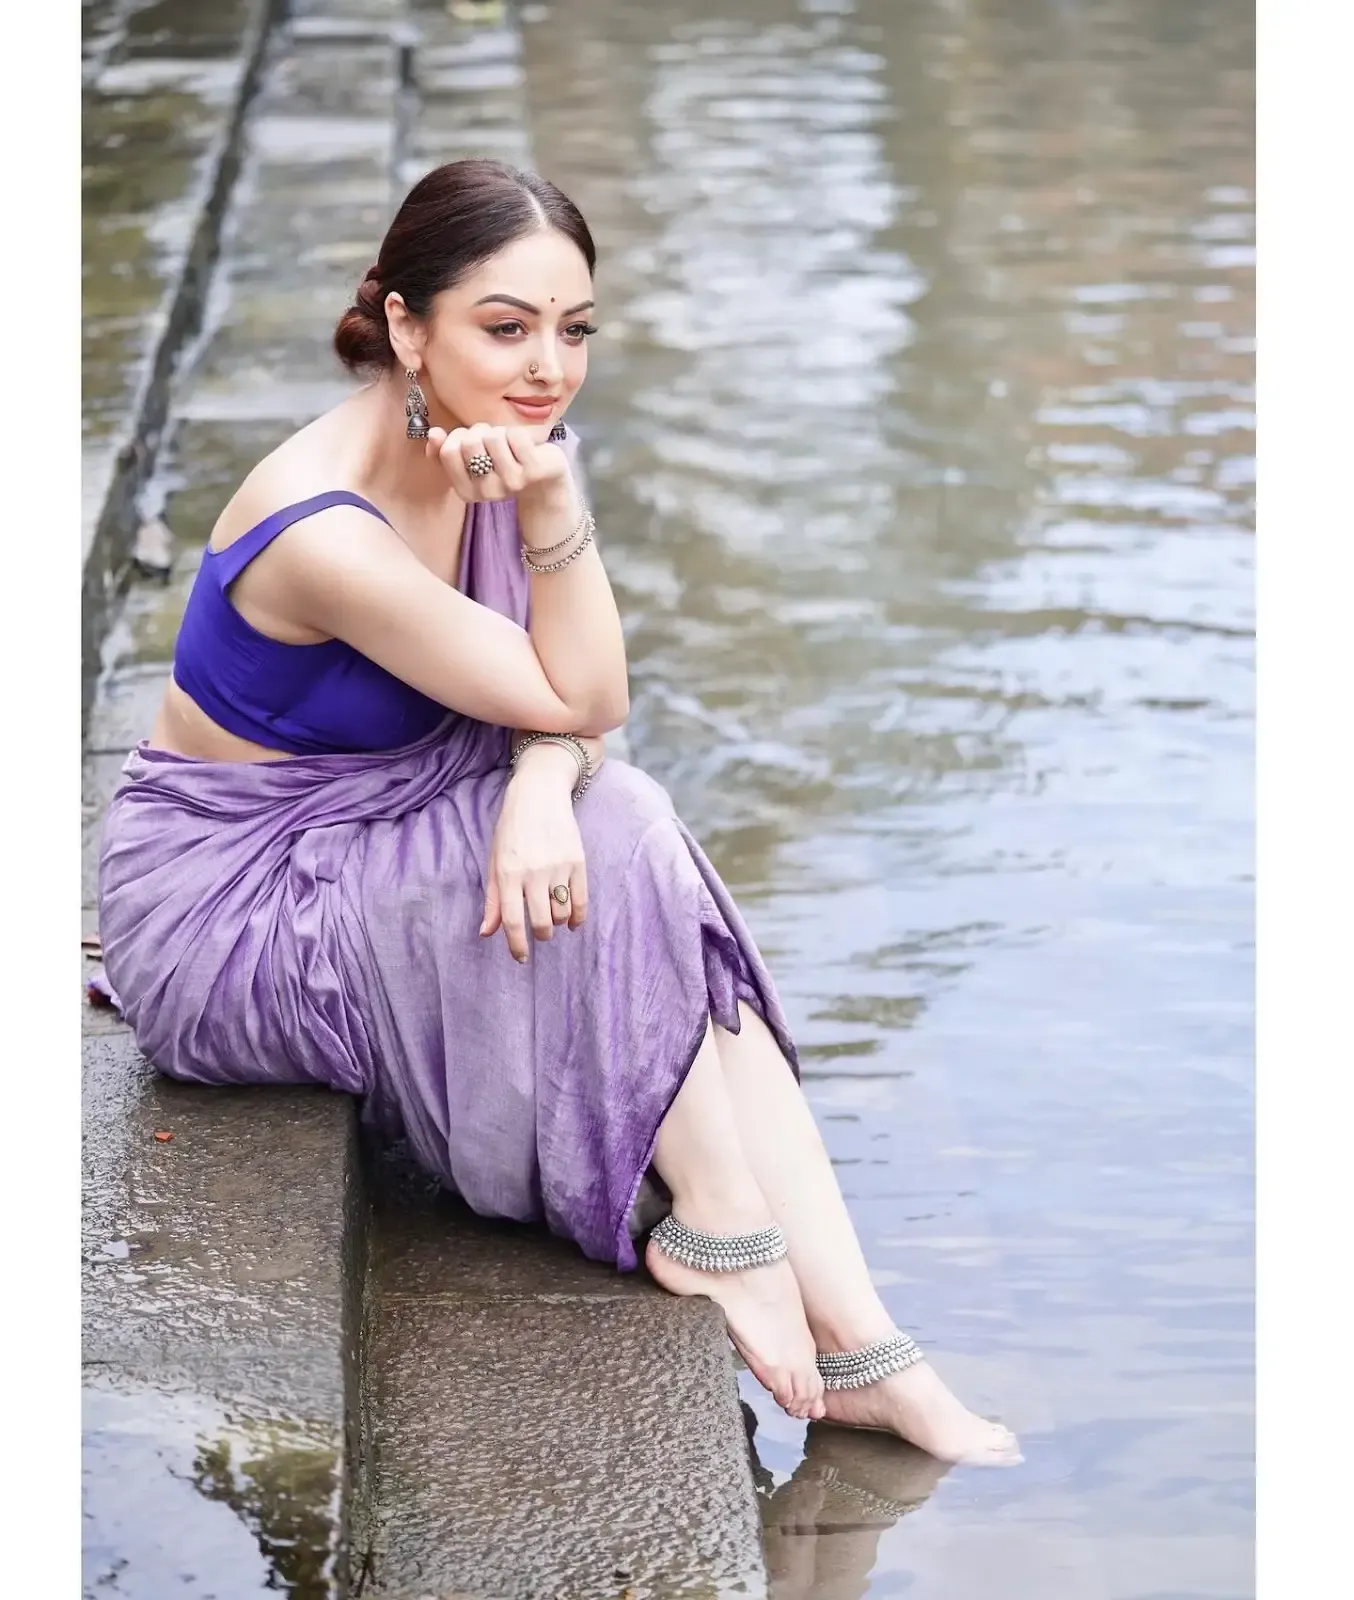 NORTH INDIAN GIRL SANDEEPA DHAR IMAGES IN TRADITIONAL VIOLET SAREE 5